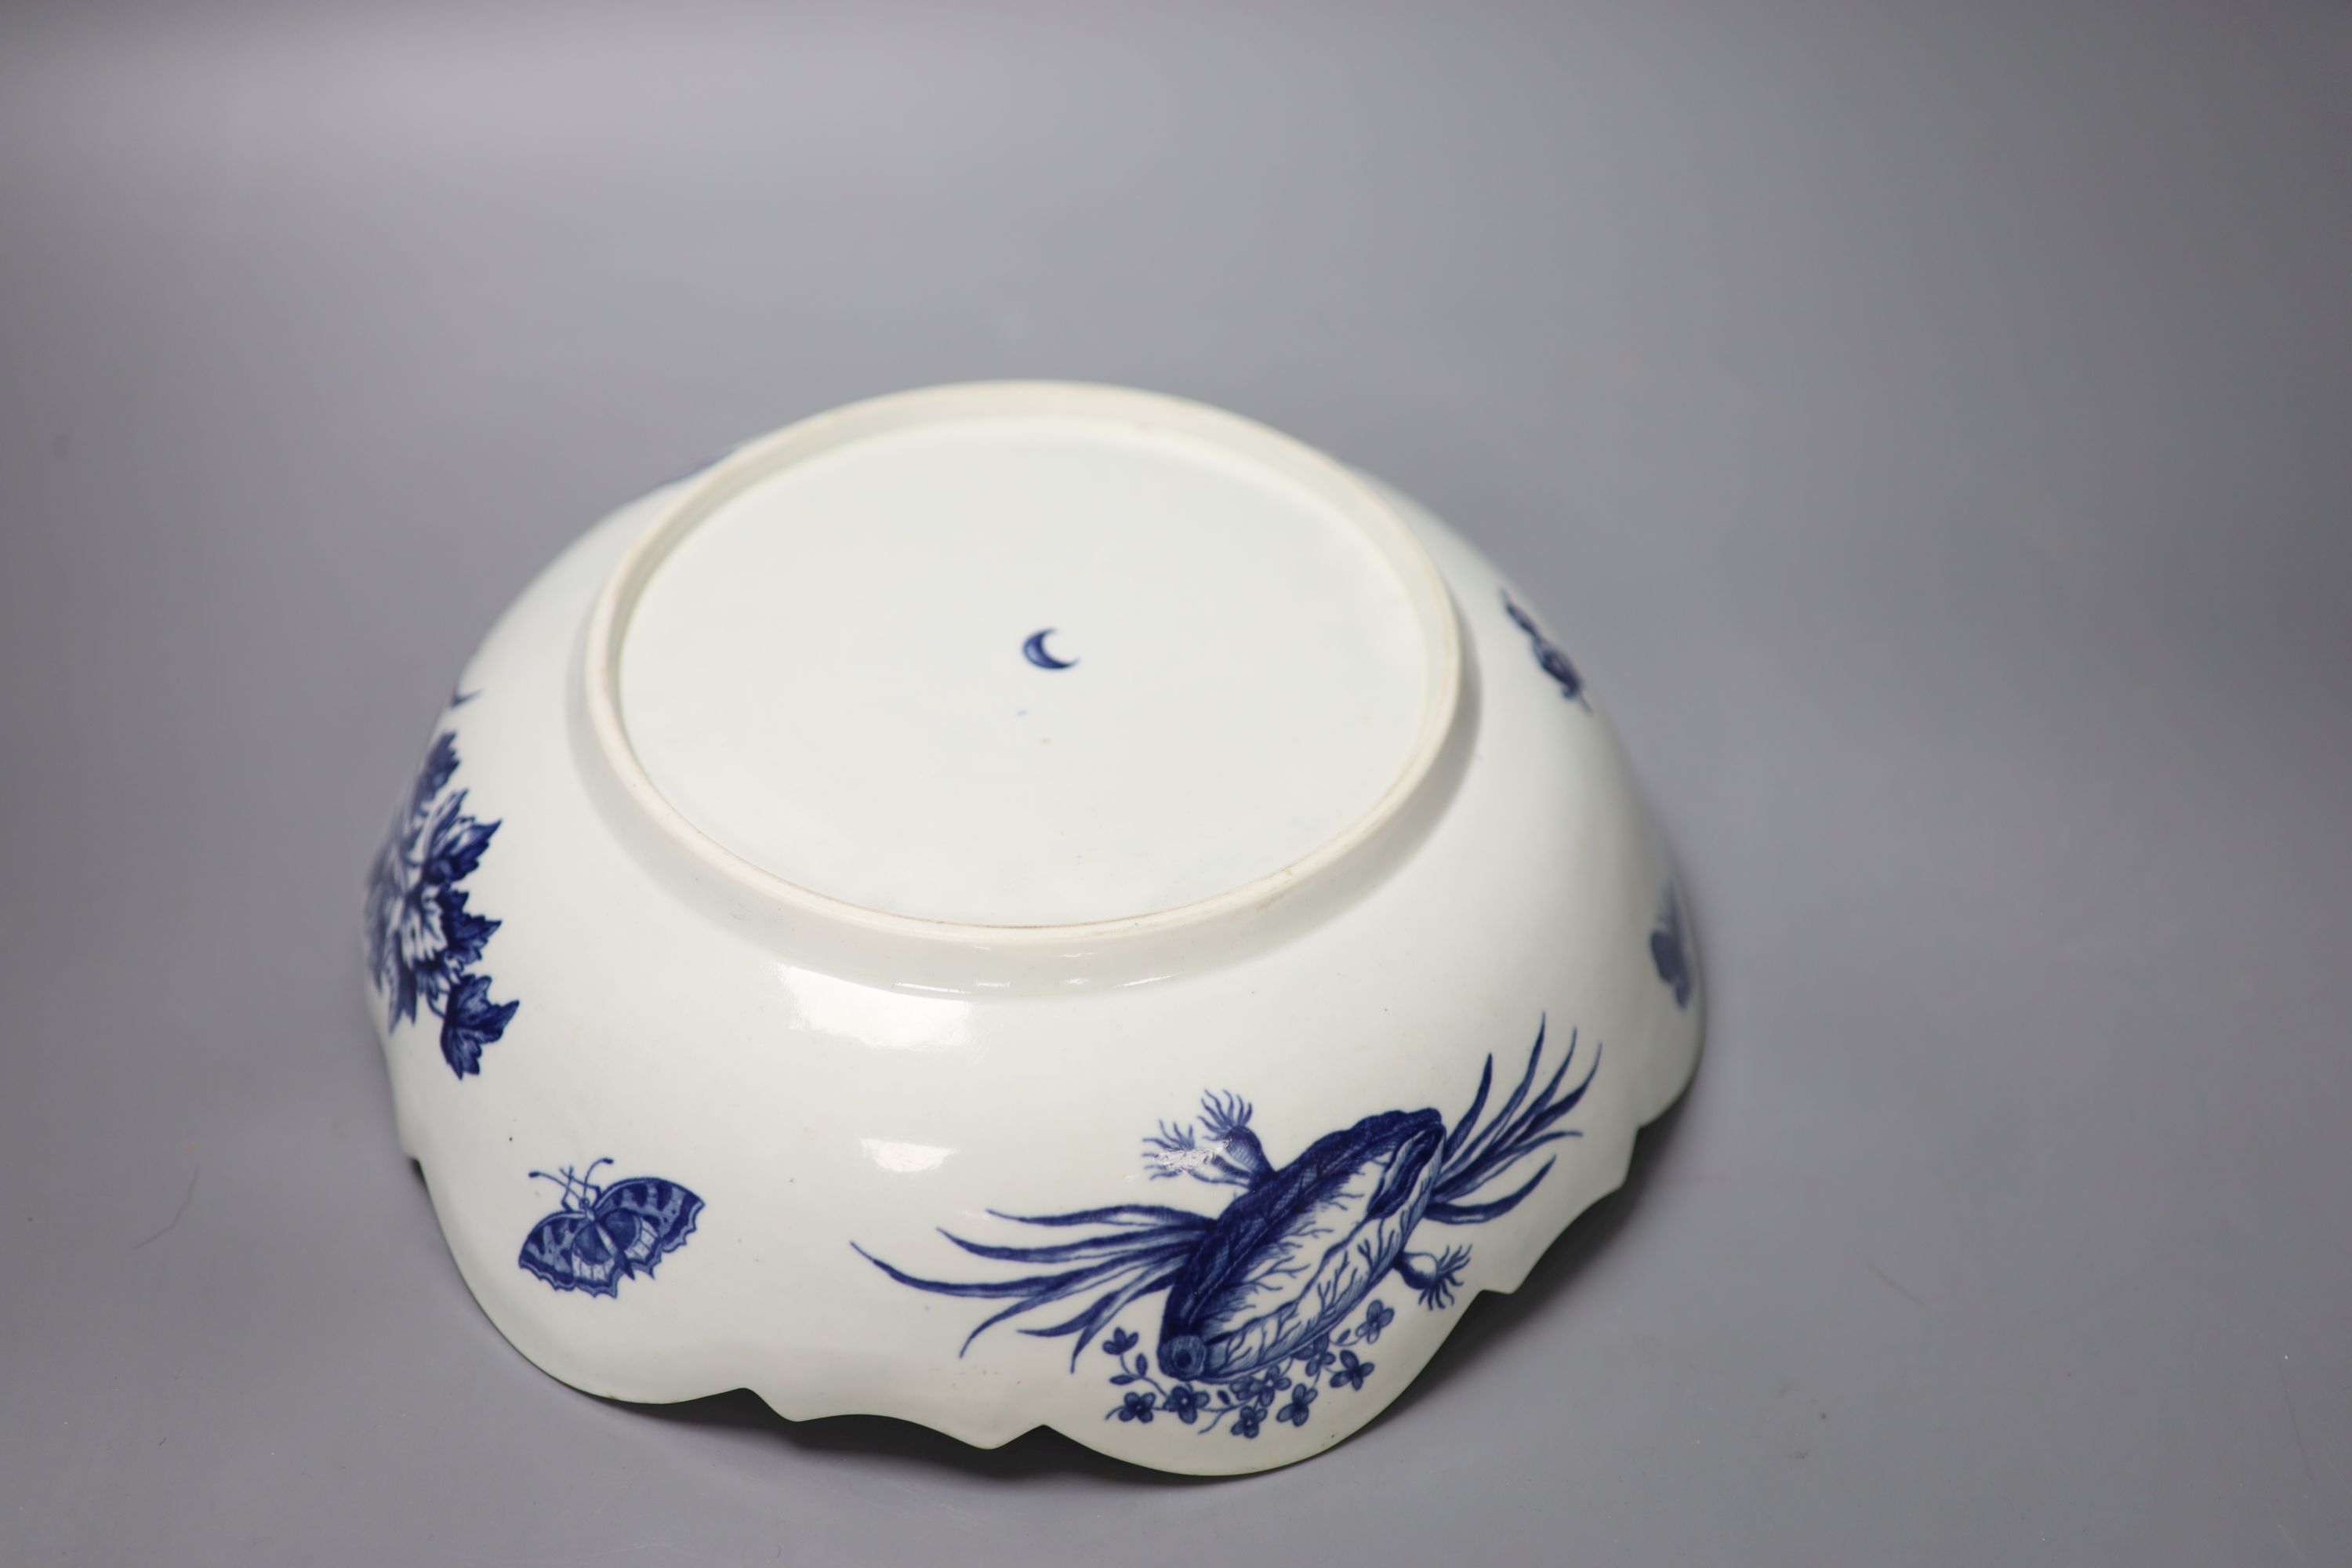 A Worcester salad bowl printed on the inside in underglaze blue with flowers, pomegranate and fir cones,